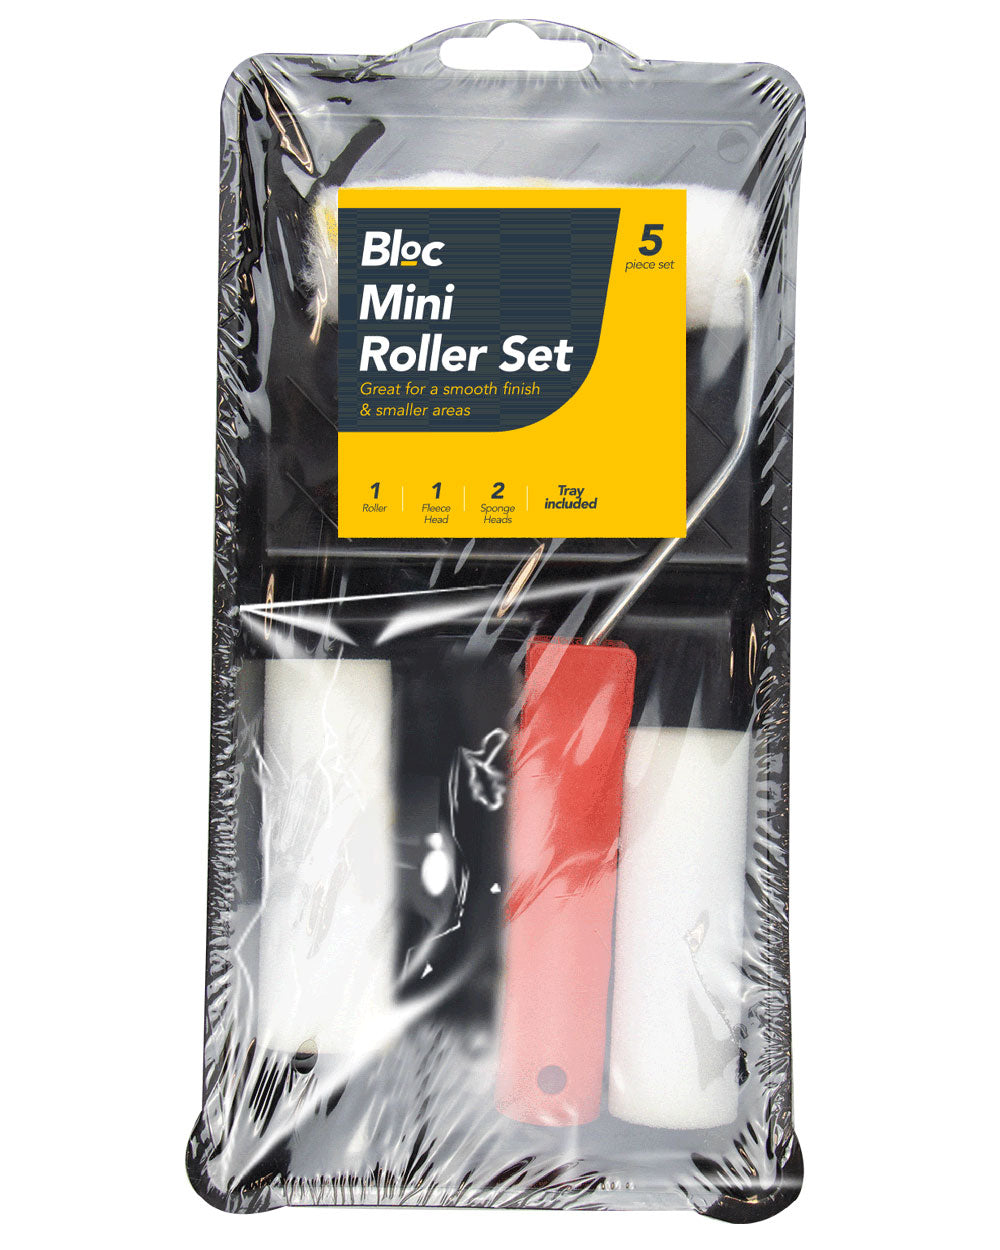 mini paint roller set perfect for upcycling this kit is pictured on a white back ground